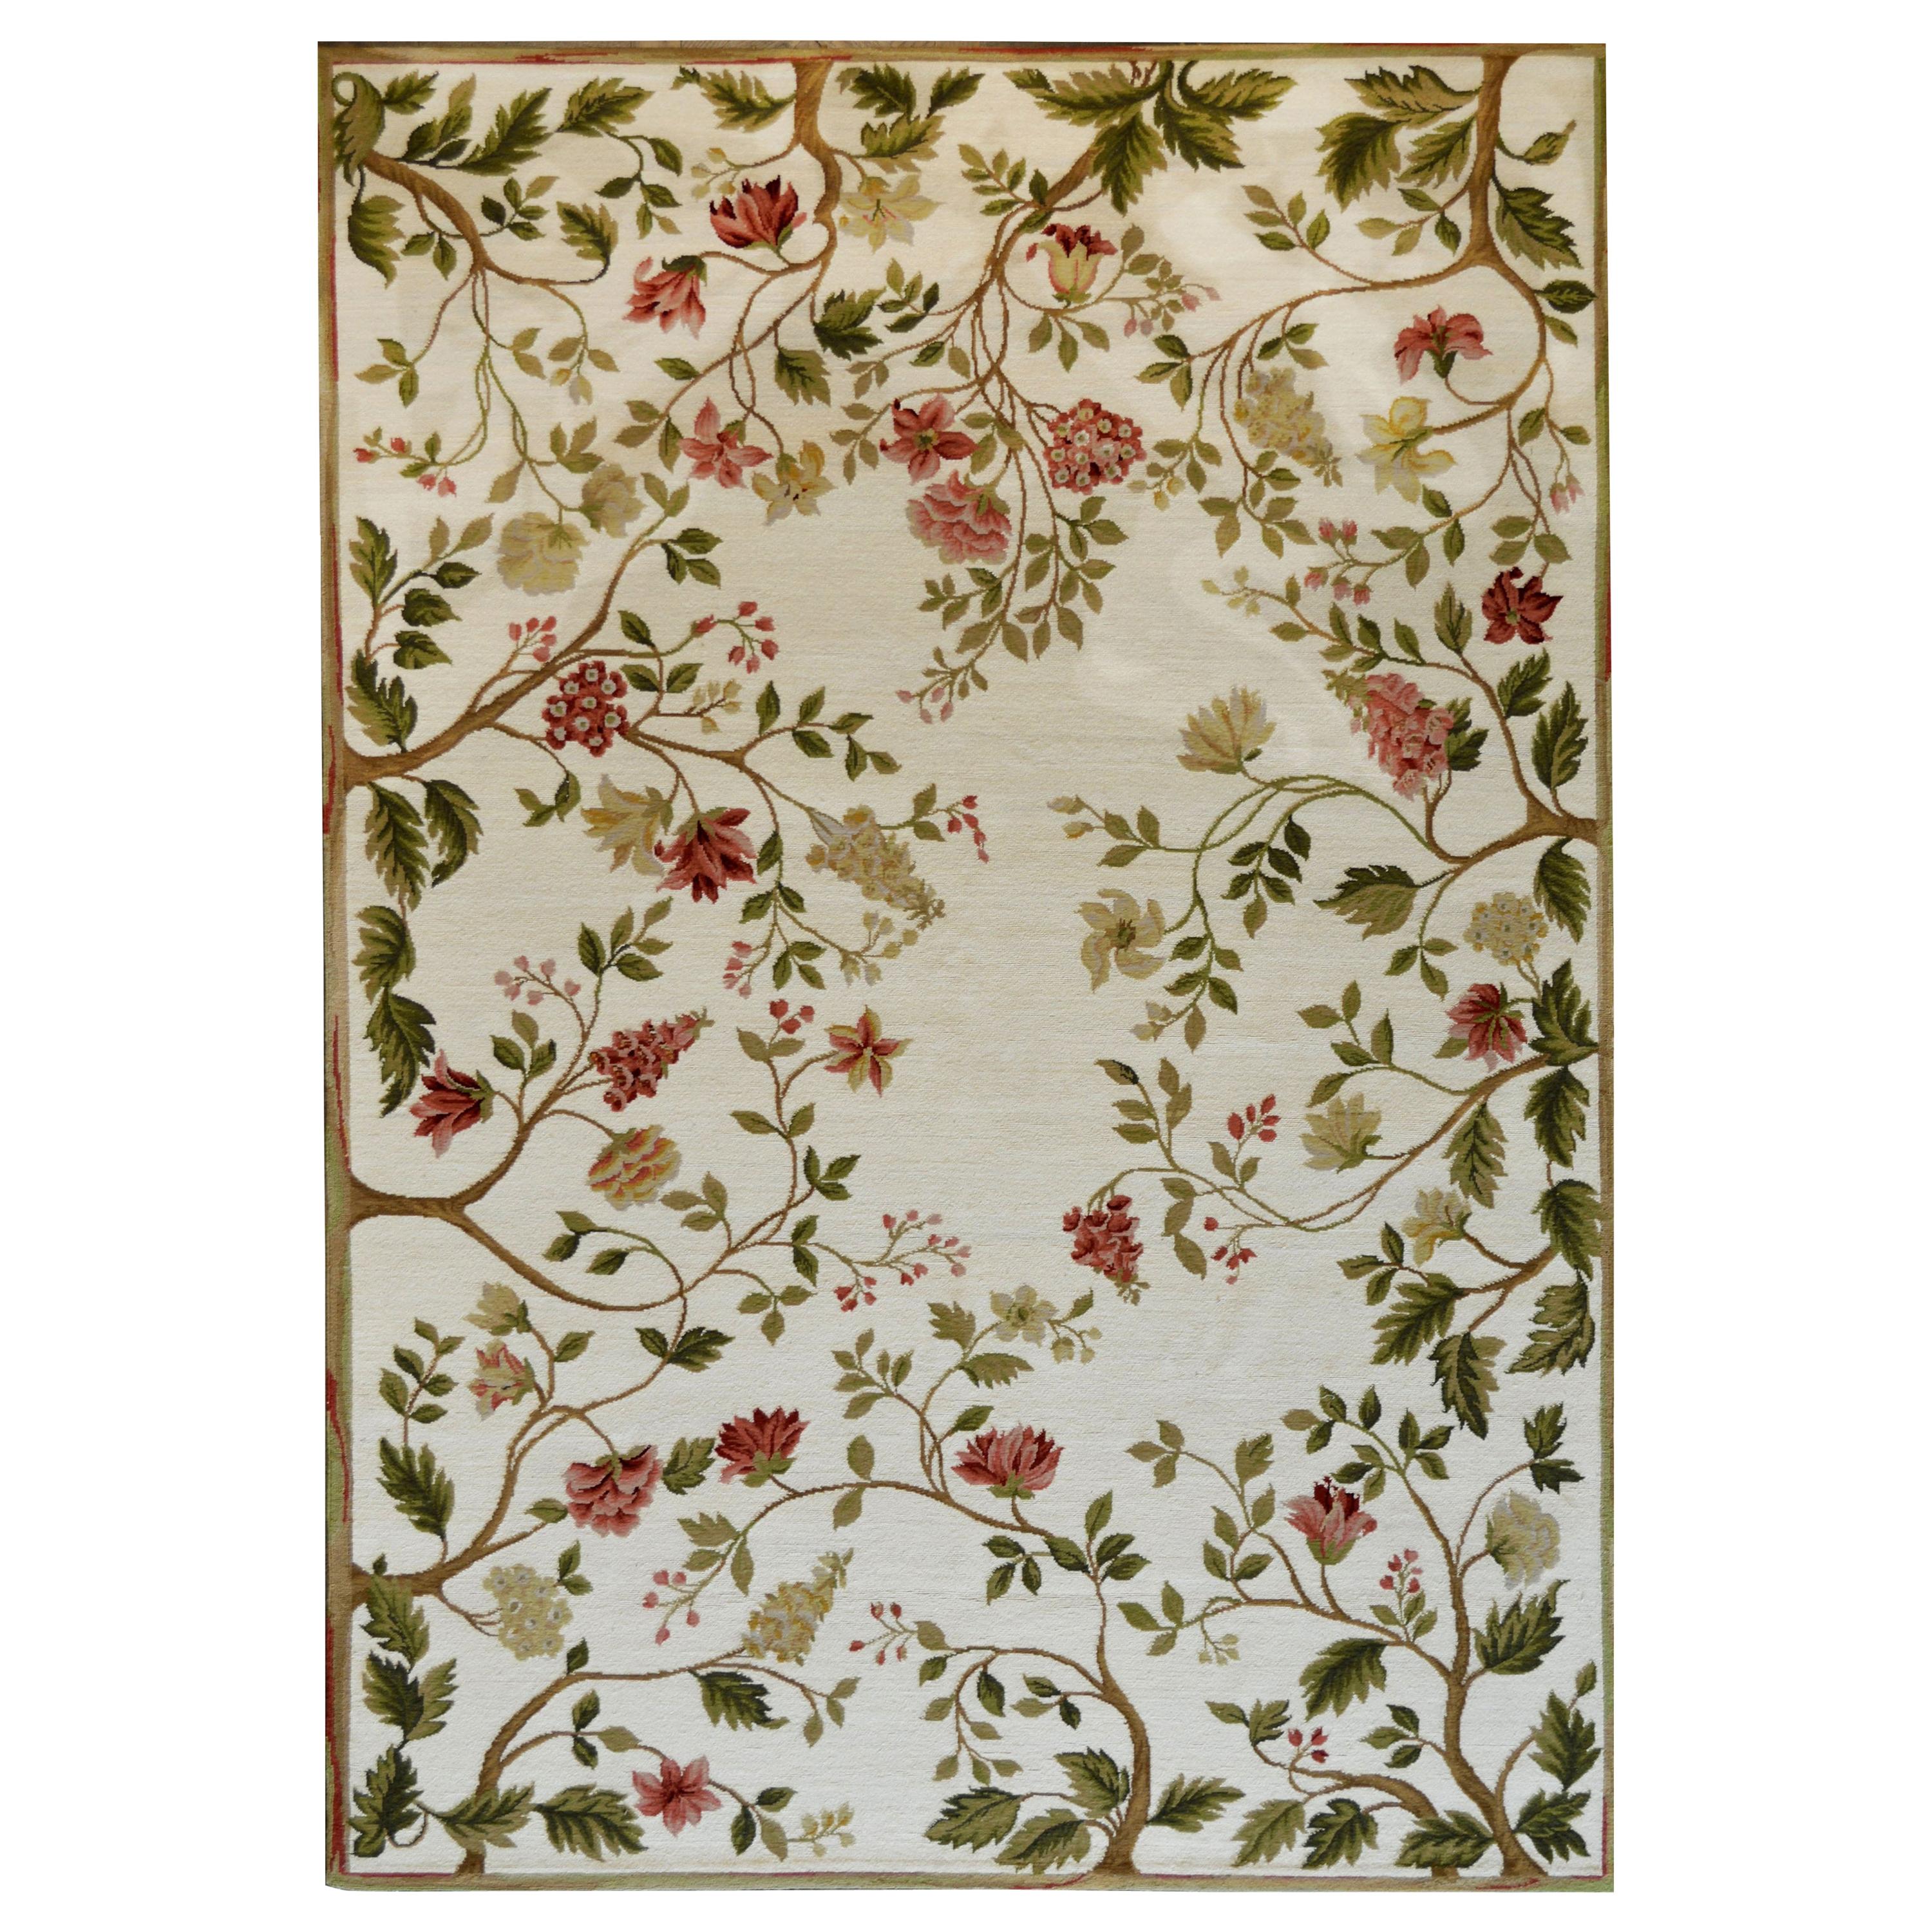 Hand-woven 100% Wool Art Deco-Inspired Floral Rug